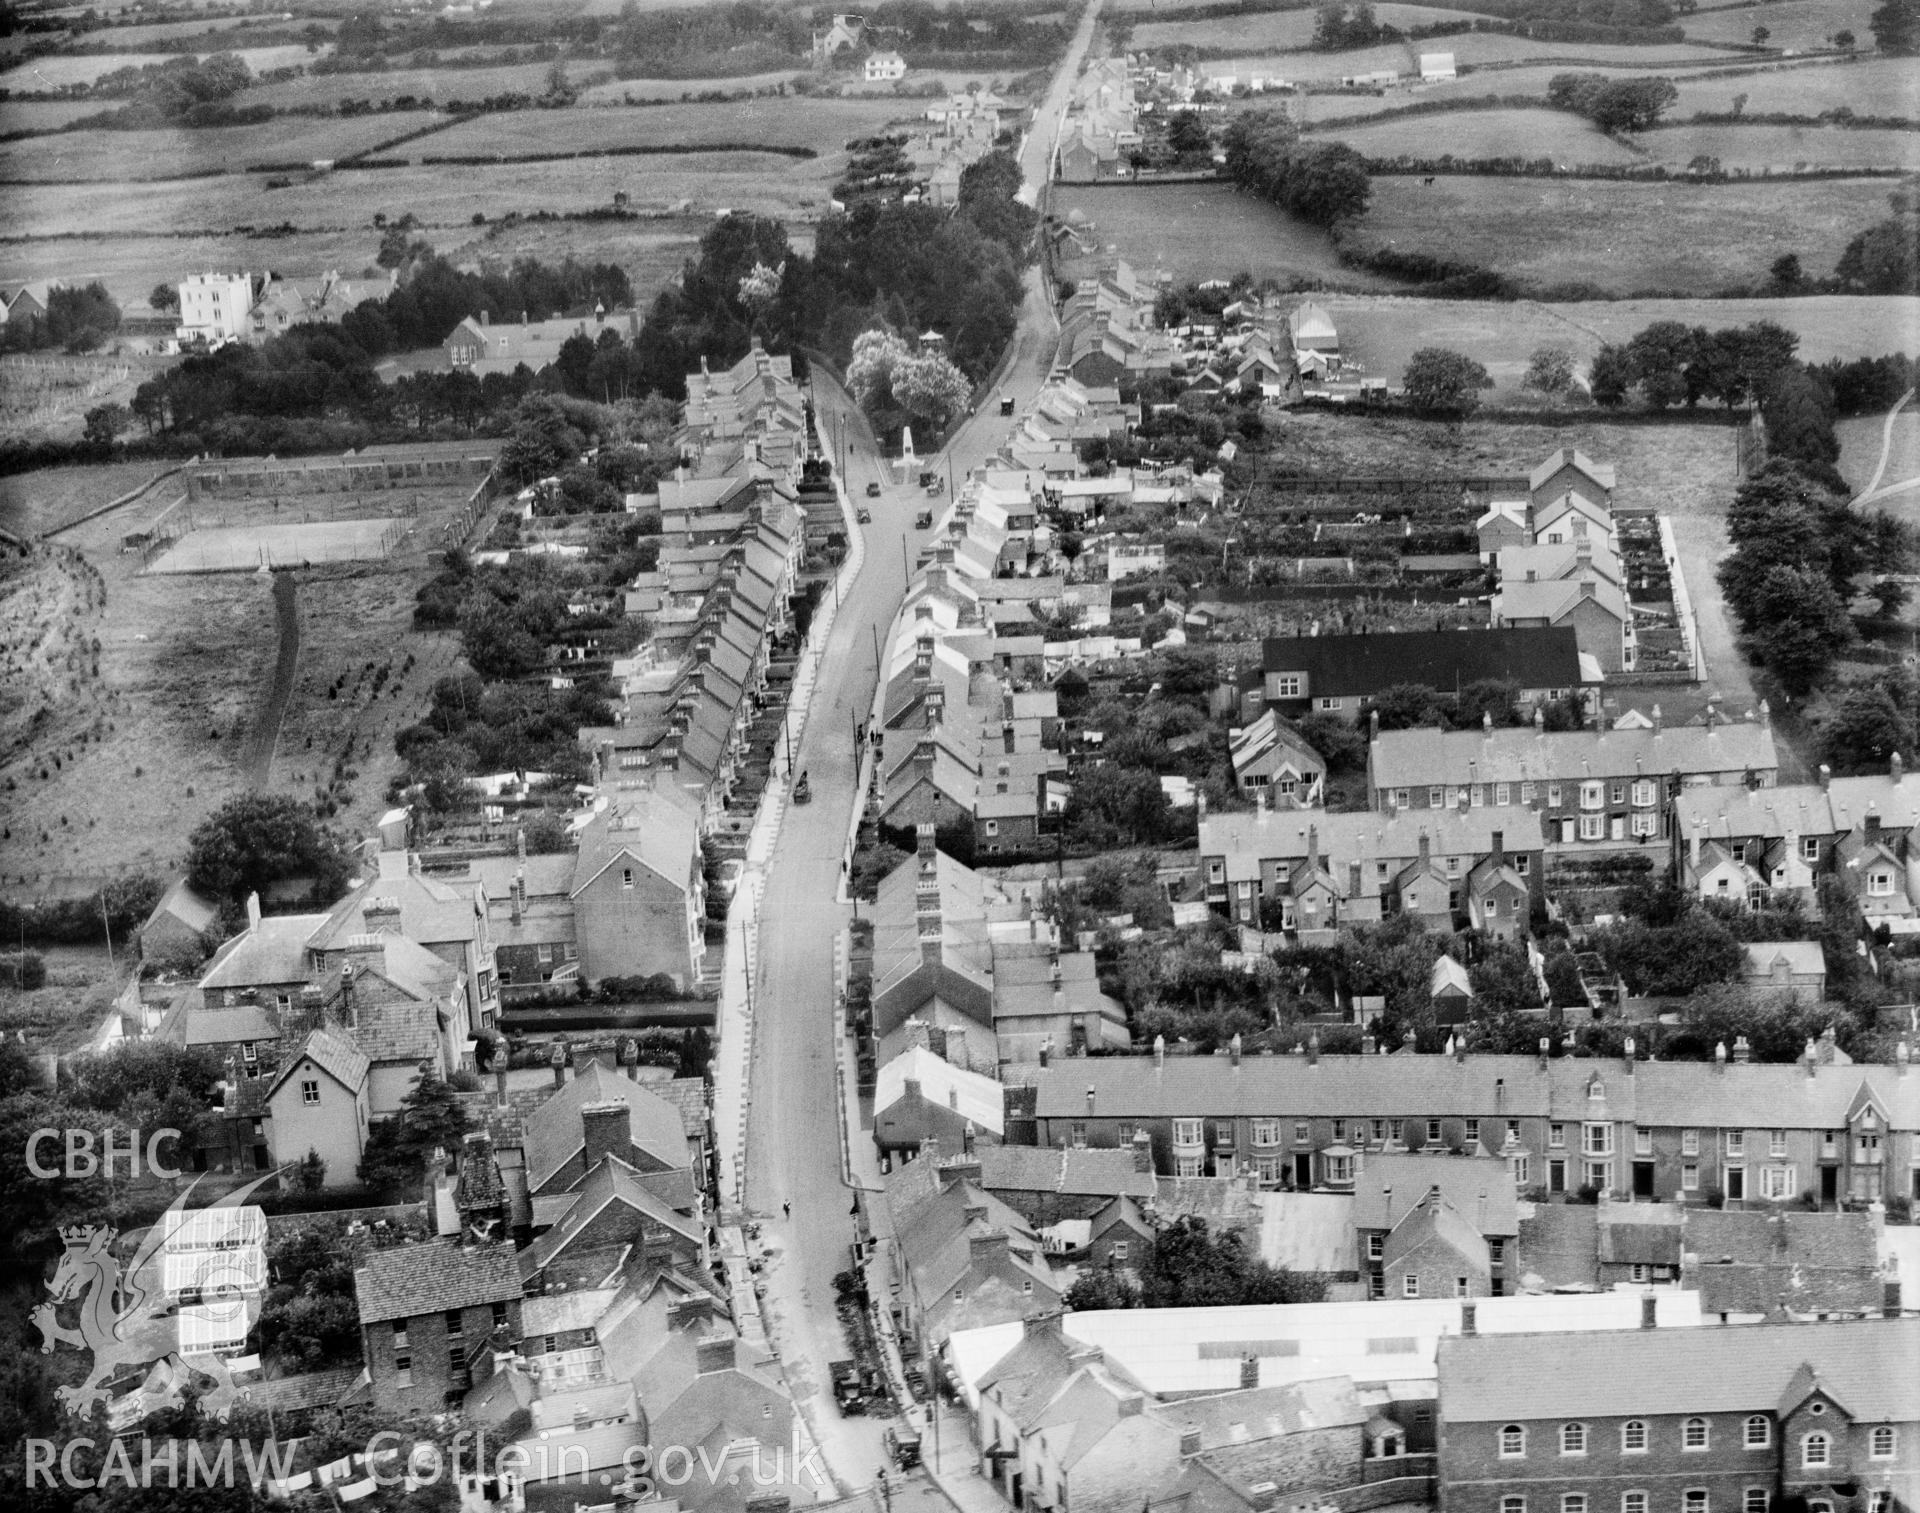 General view of Cardigan, oblique aerial view. 5?x4? black and white glass plate negative.